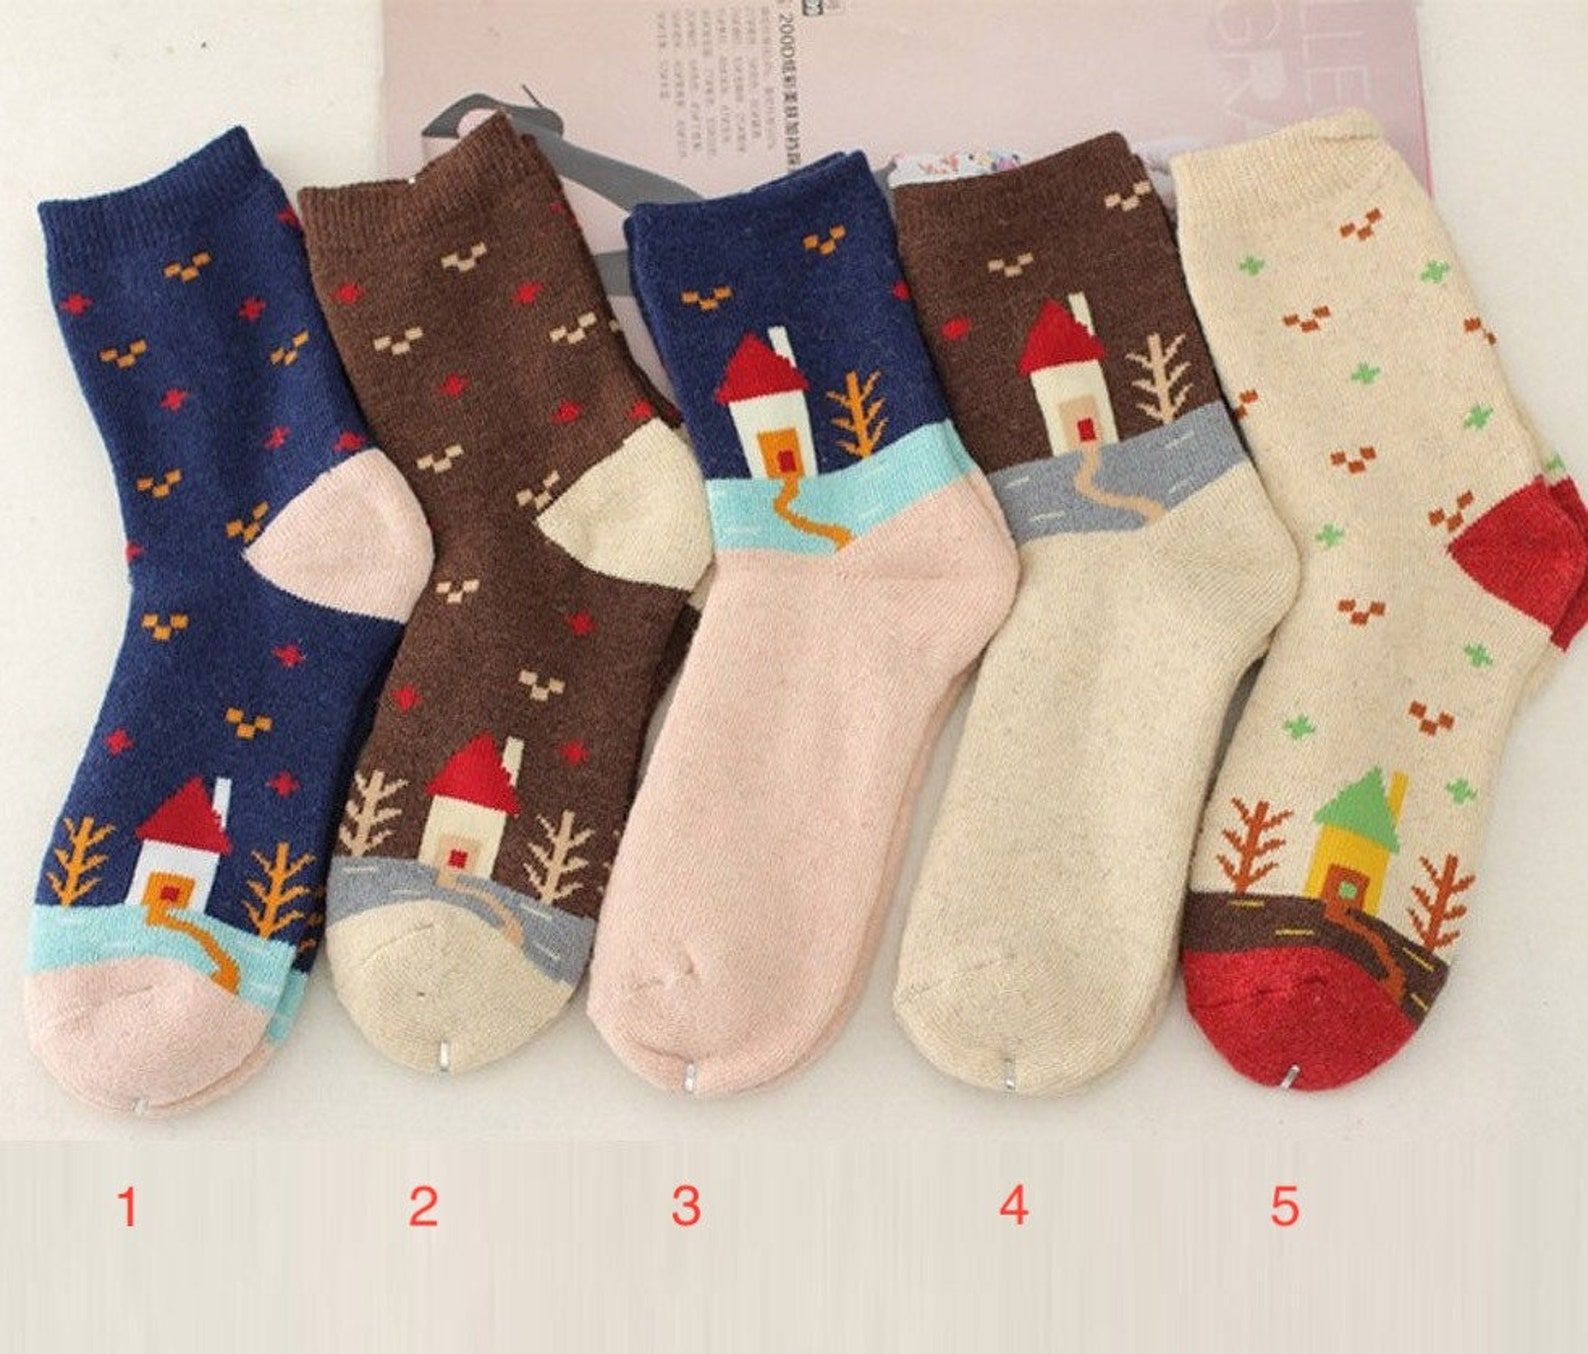 Five different pairs of socks. Each features a small home and a winter scene. 